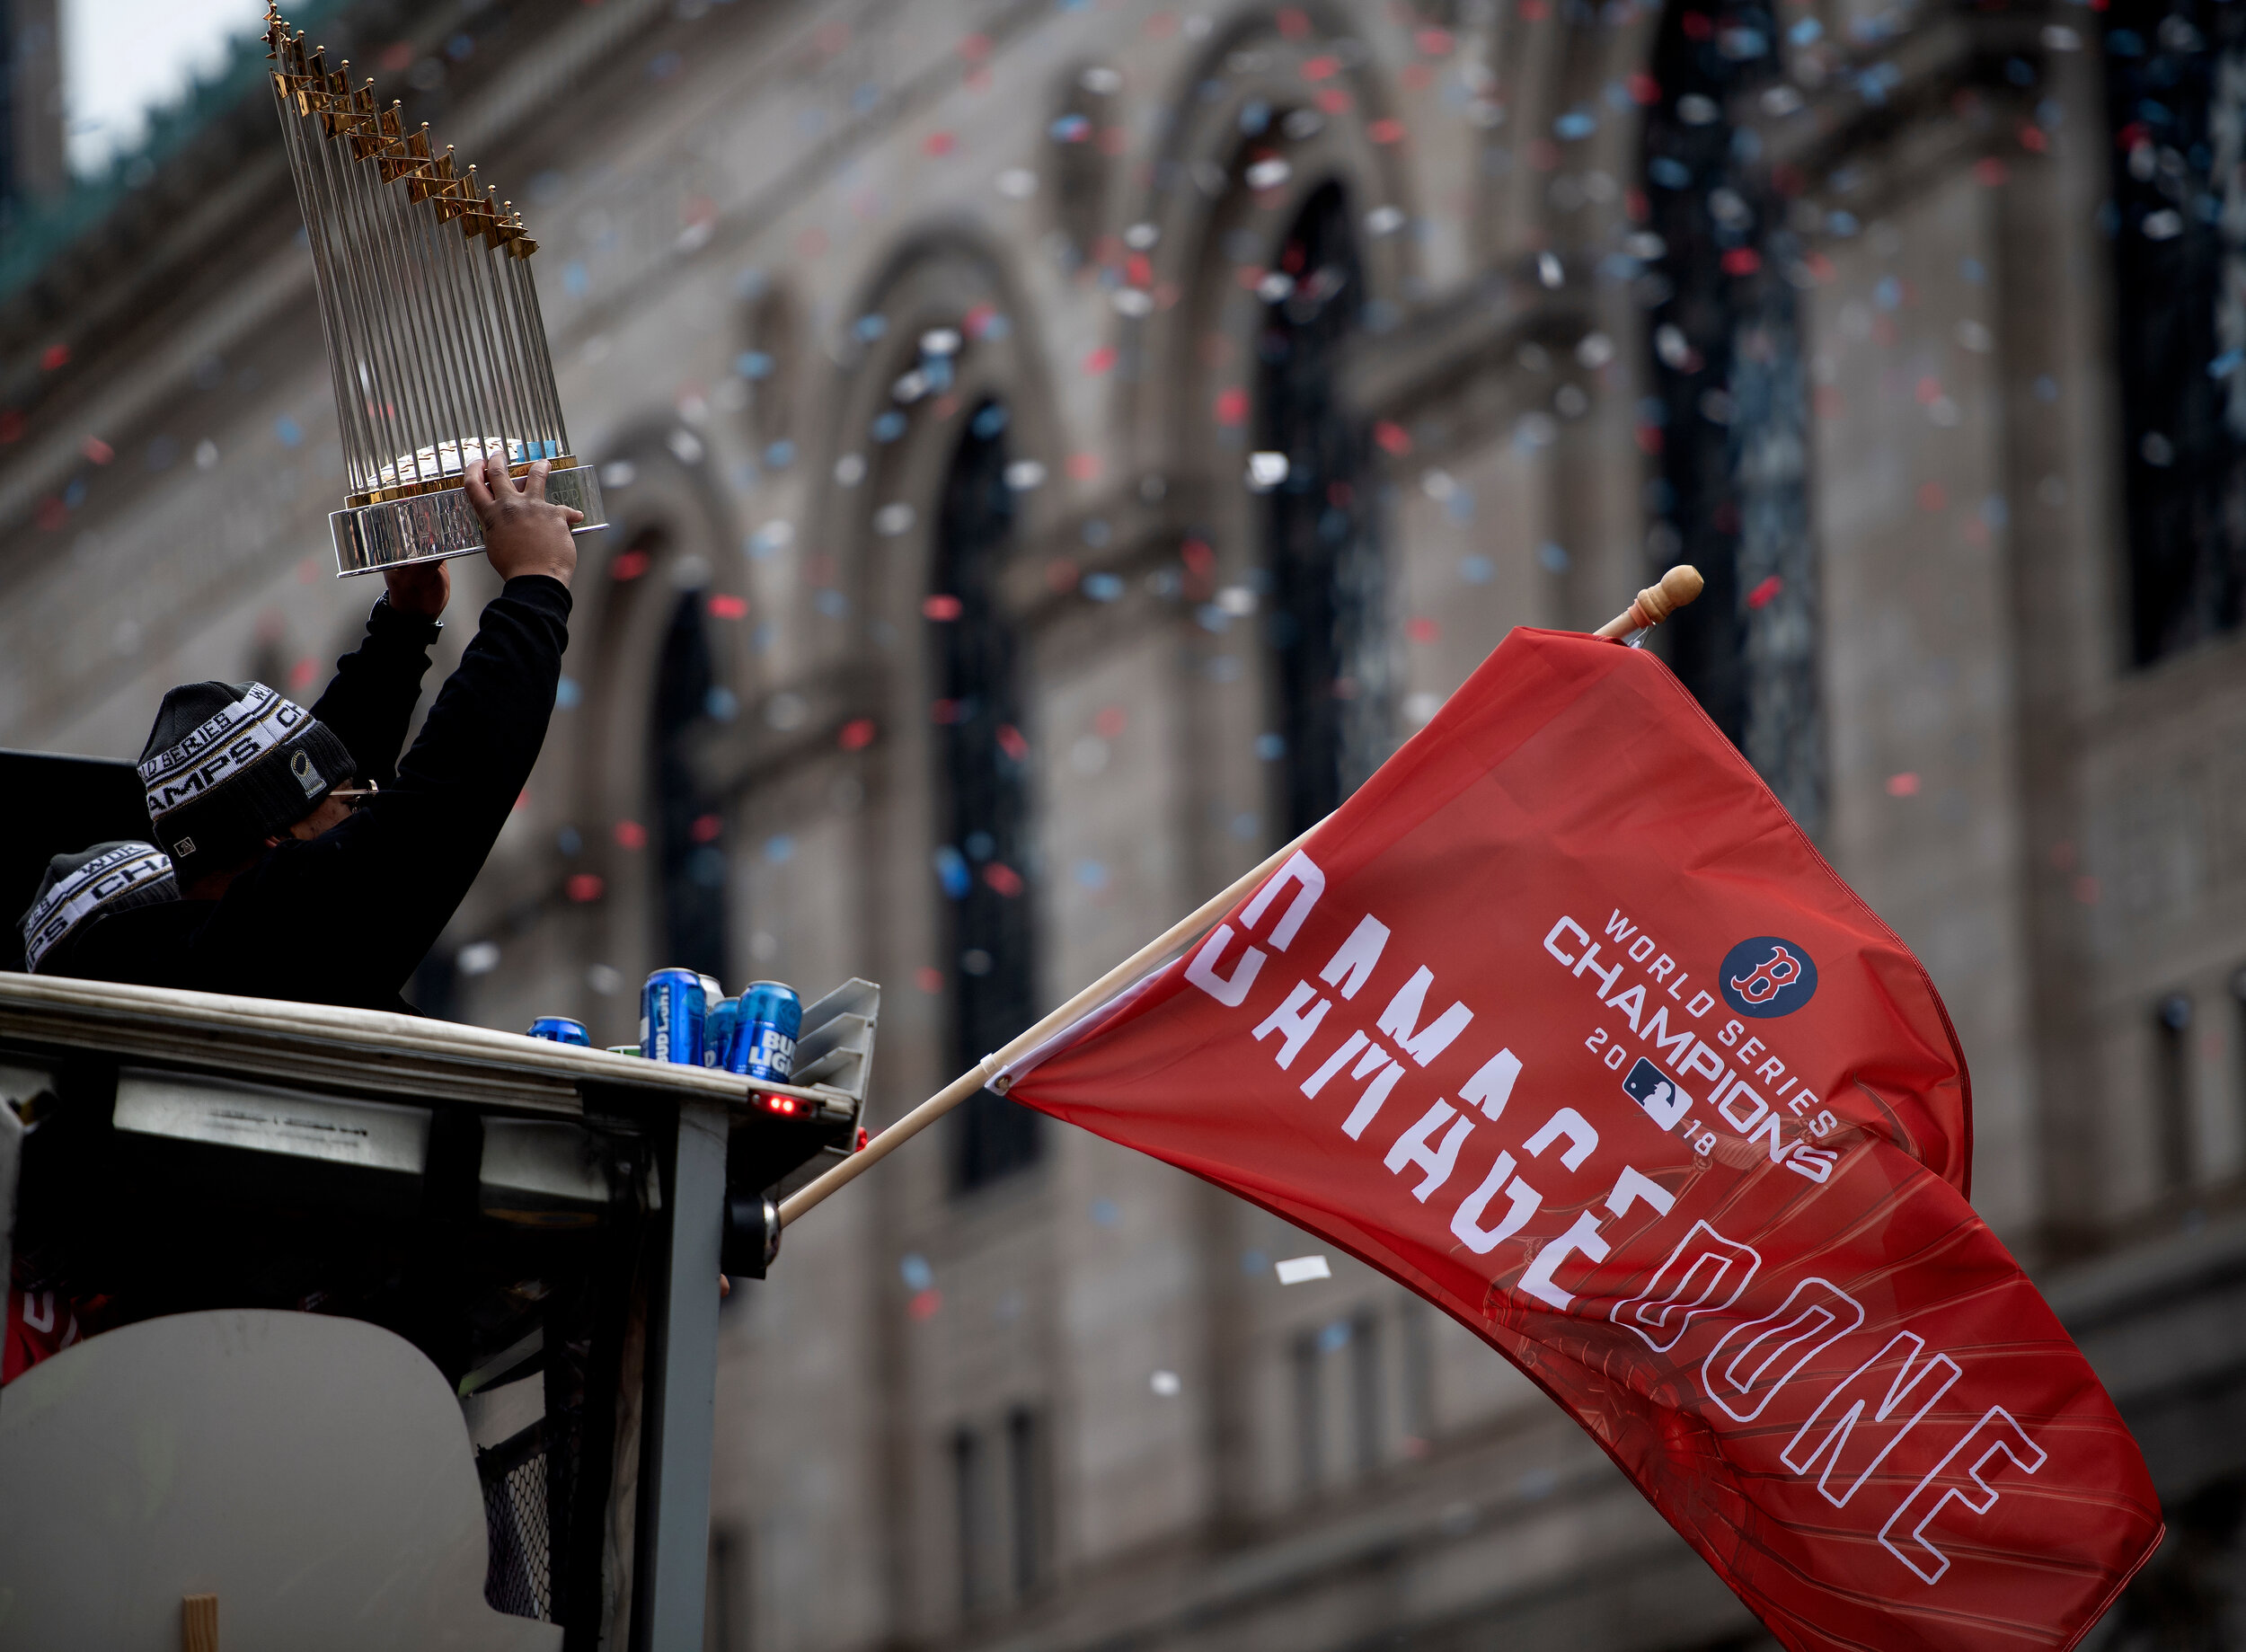  Rafael Devers #11 holds the Commissioner’s Trophy as confetti fills the air during the Boston Red Sox’s World Series parade through downtown Boston, Massachusetts, on October 31, 2018. 